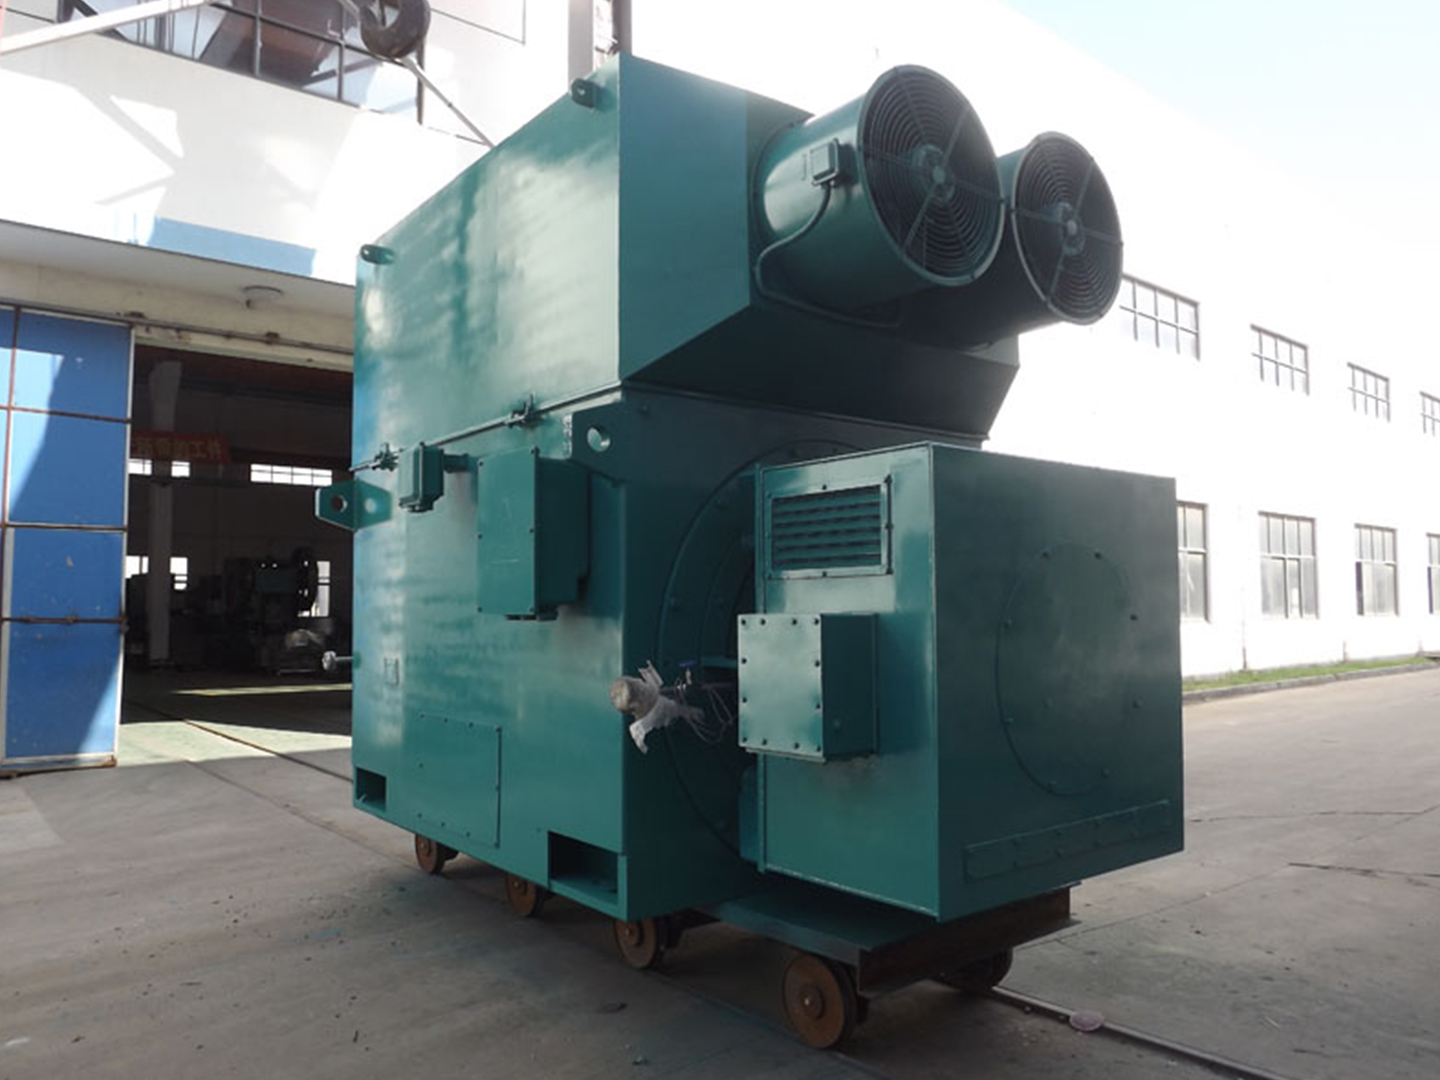 3150KW slip ring motor exported to kenya customer's cement plant , the motor are working normally in kenya cement plant till now .